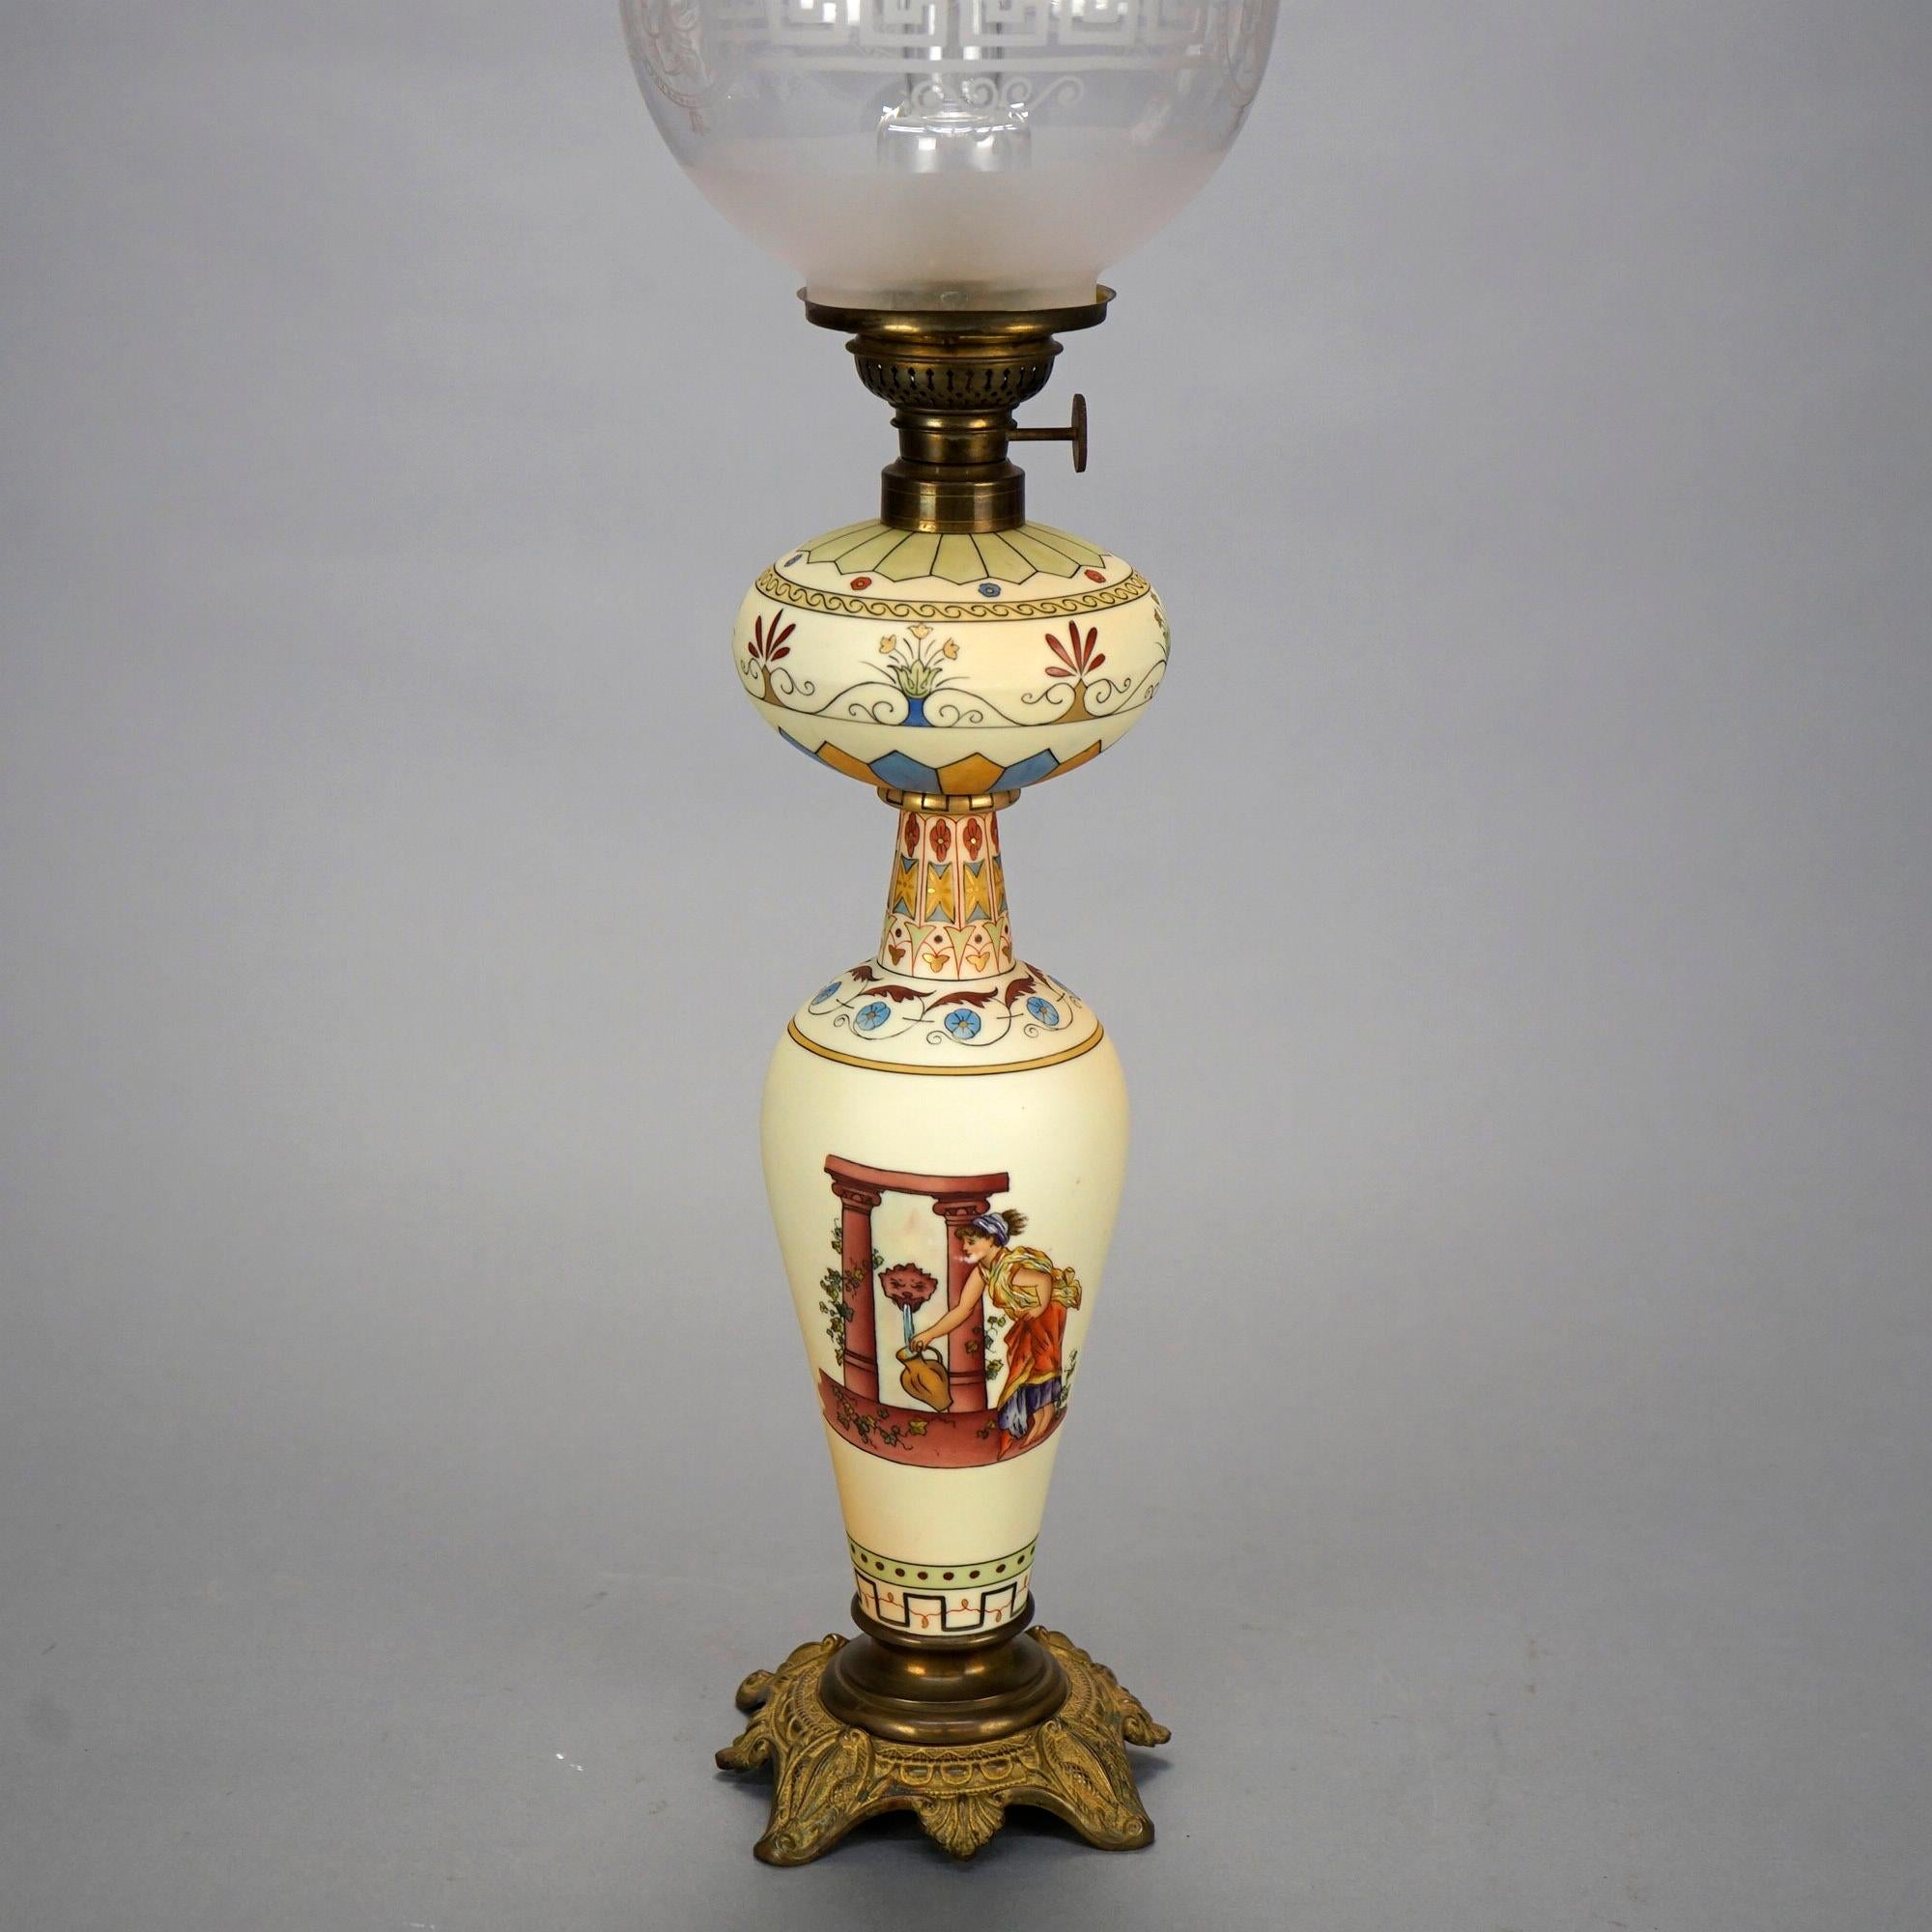 19th Century Antique Italian Hand Painted Porcelain Banquet Oil Lamp with Genre Scene, 19th C